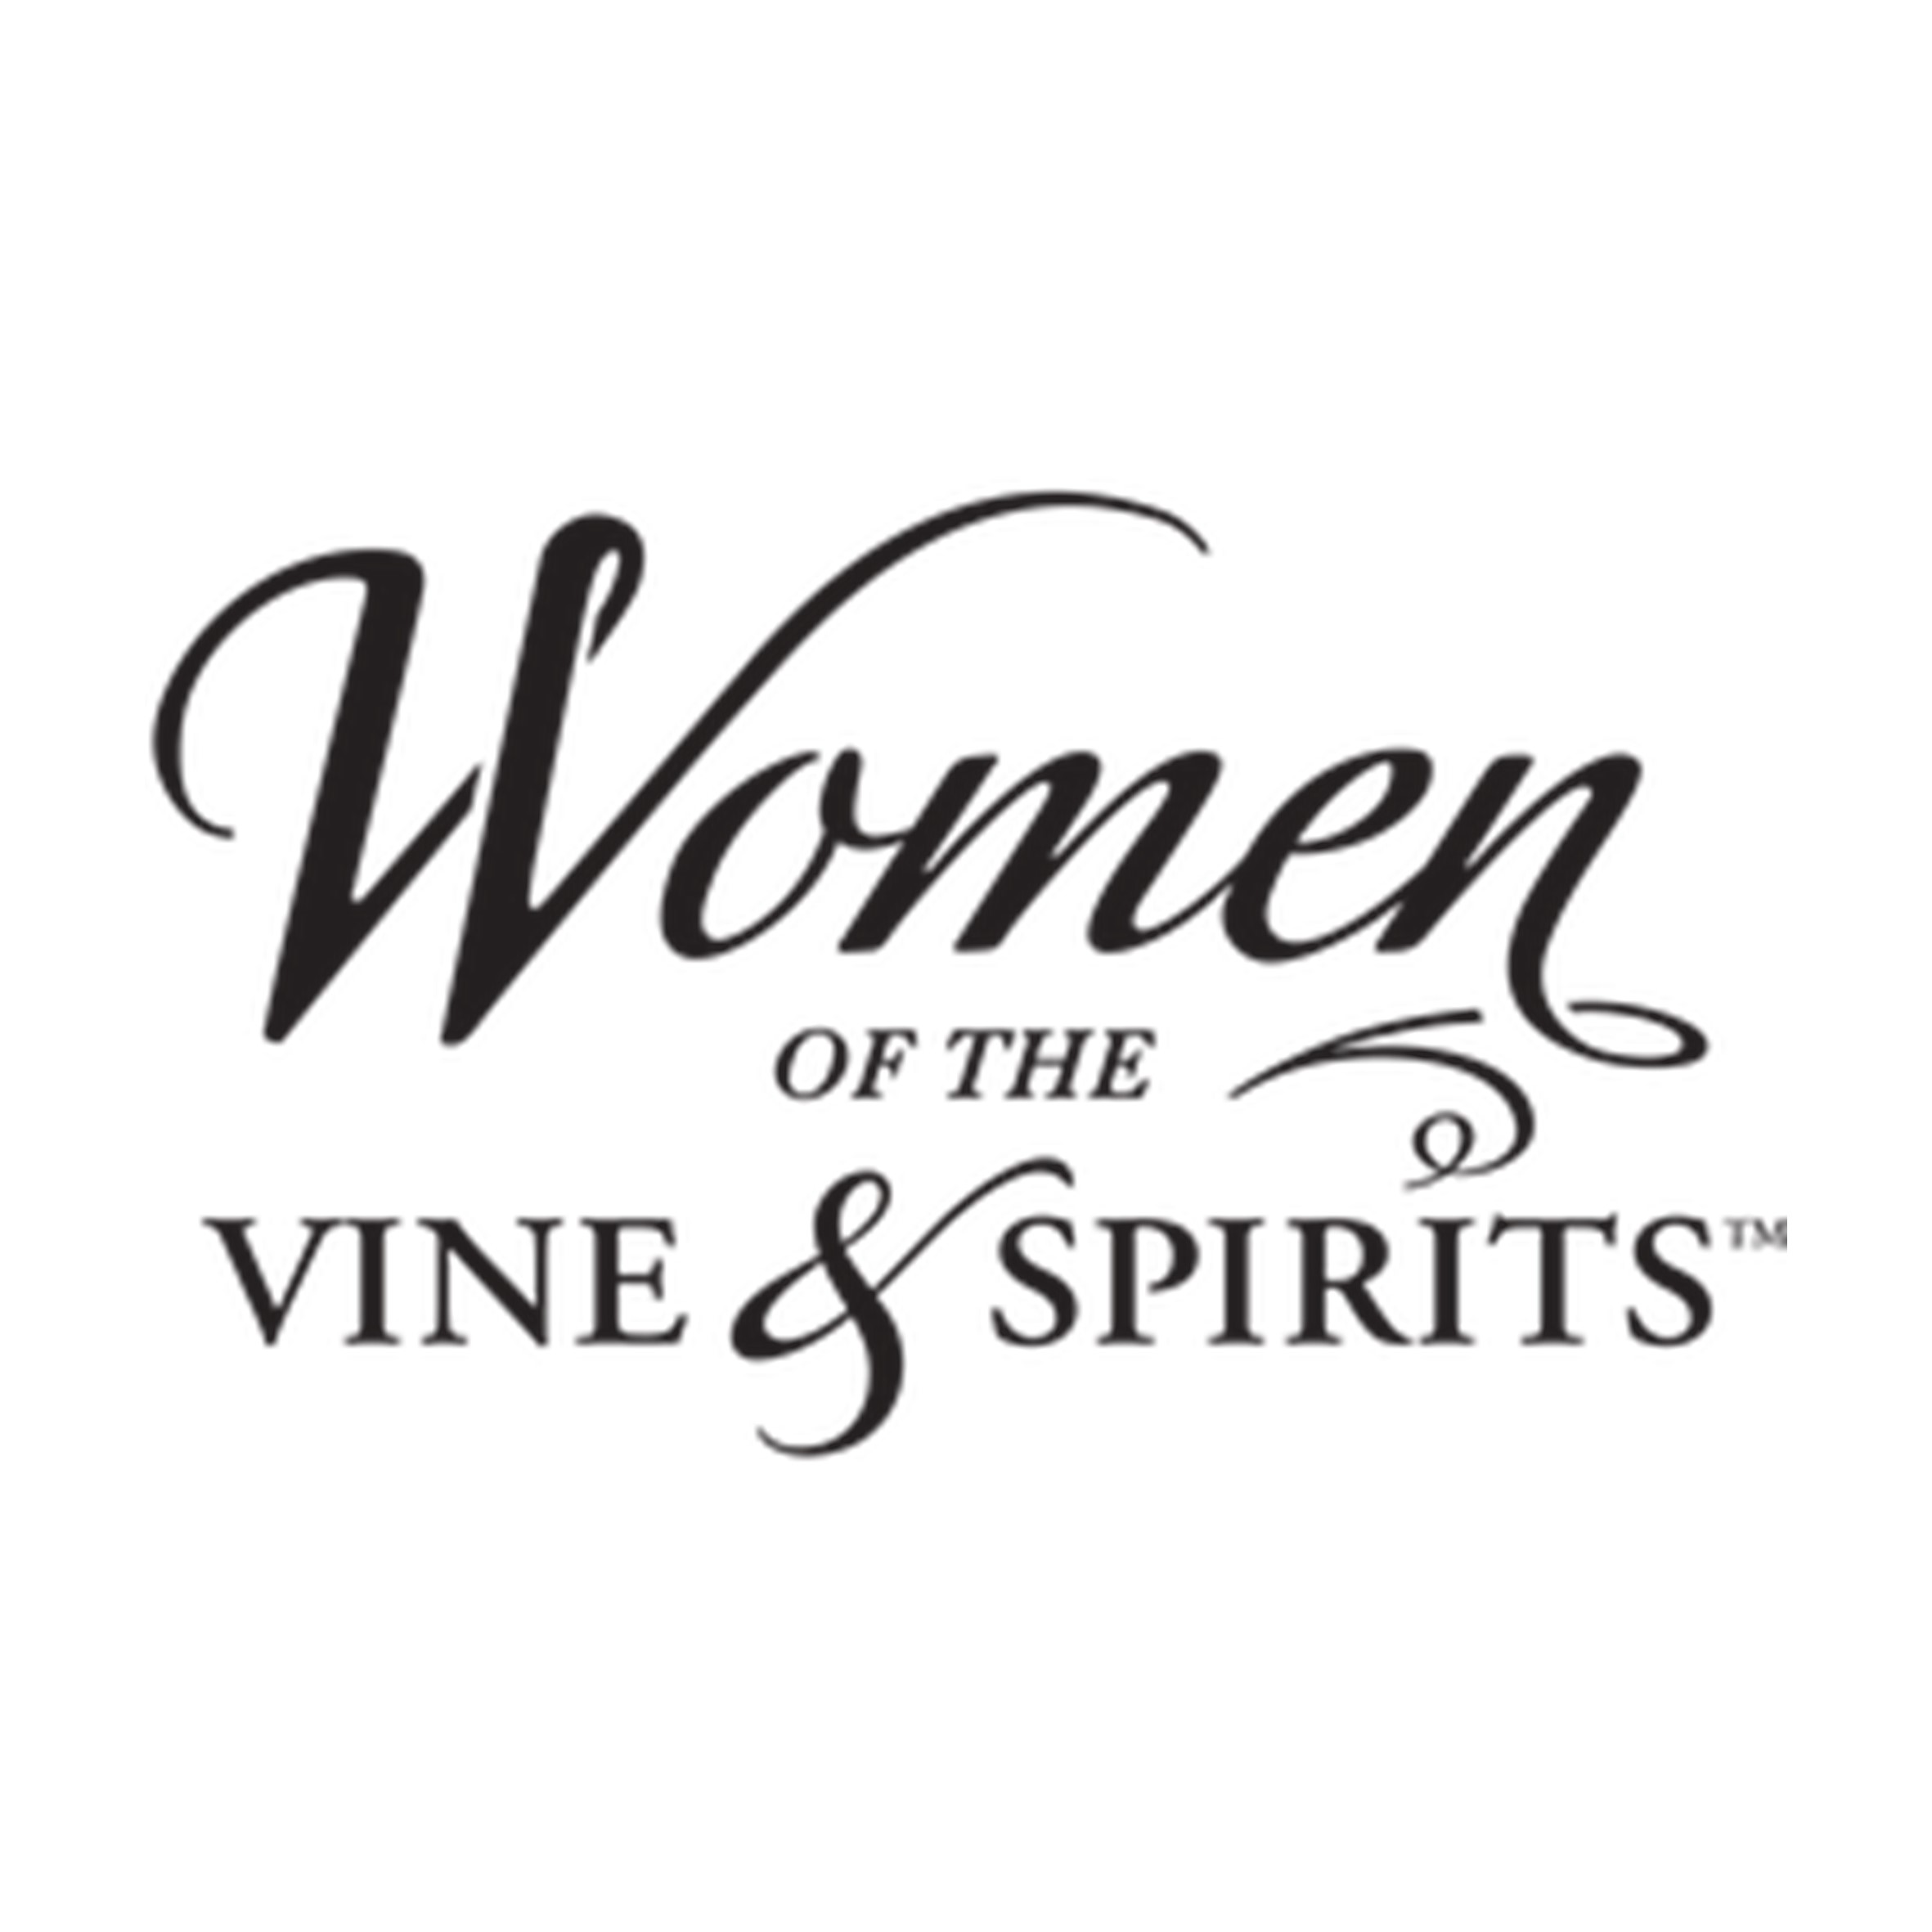 Women of the Vine logo - Press release: China’s imported wine market